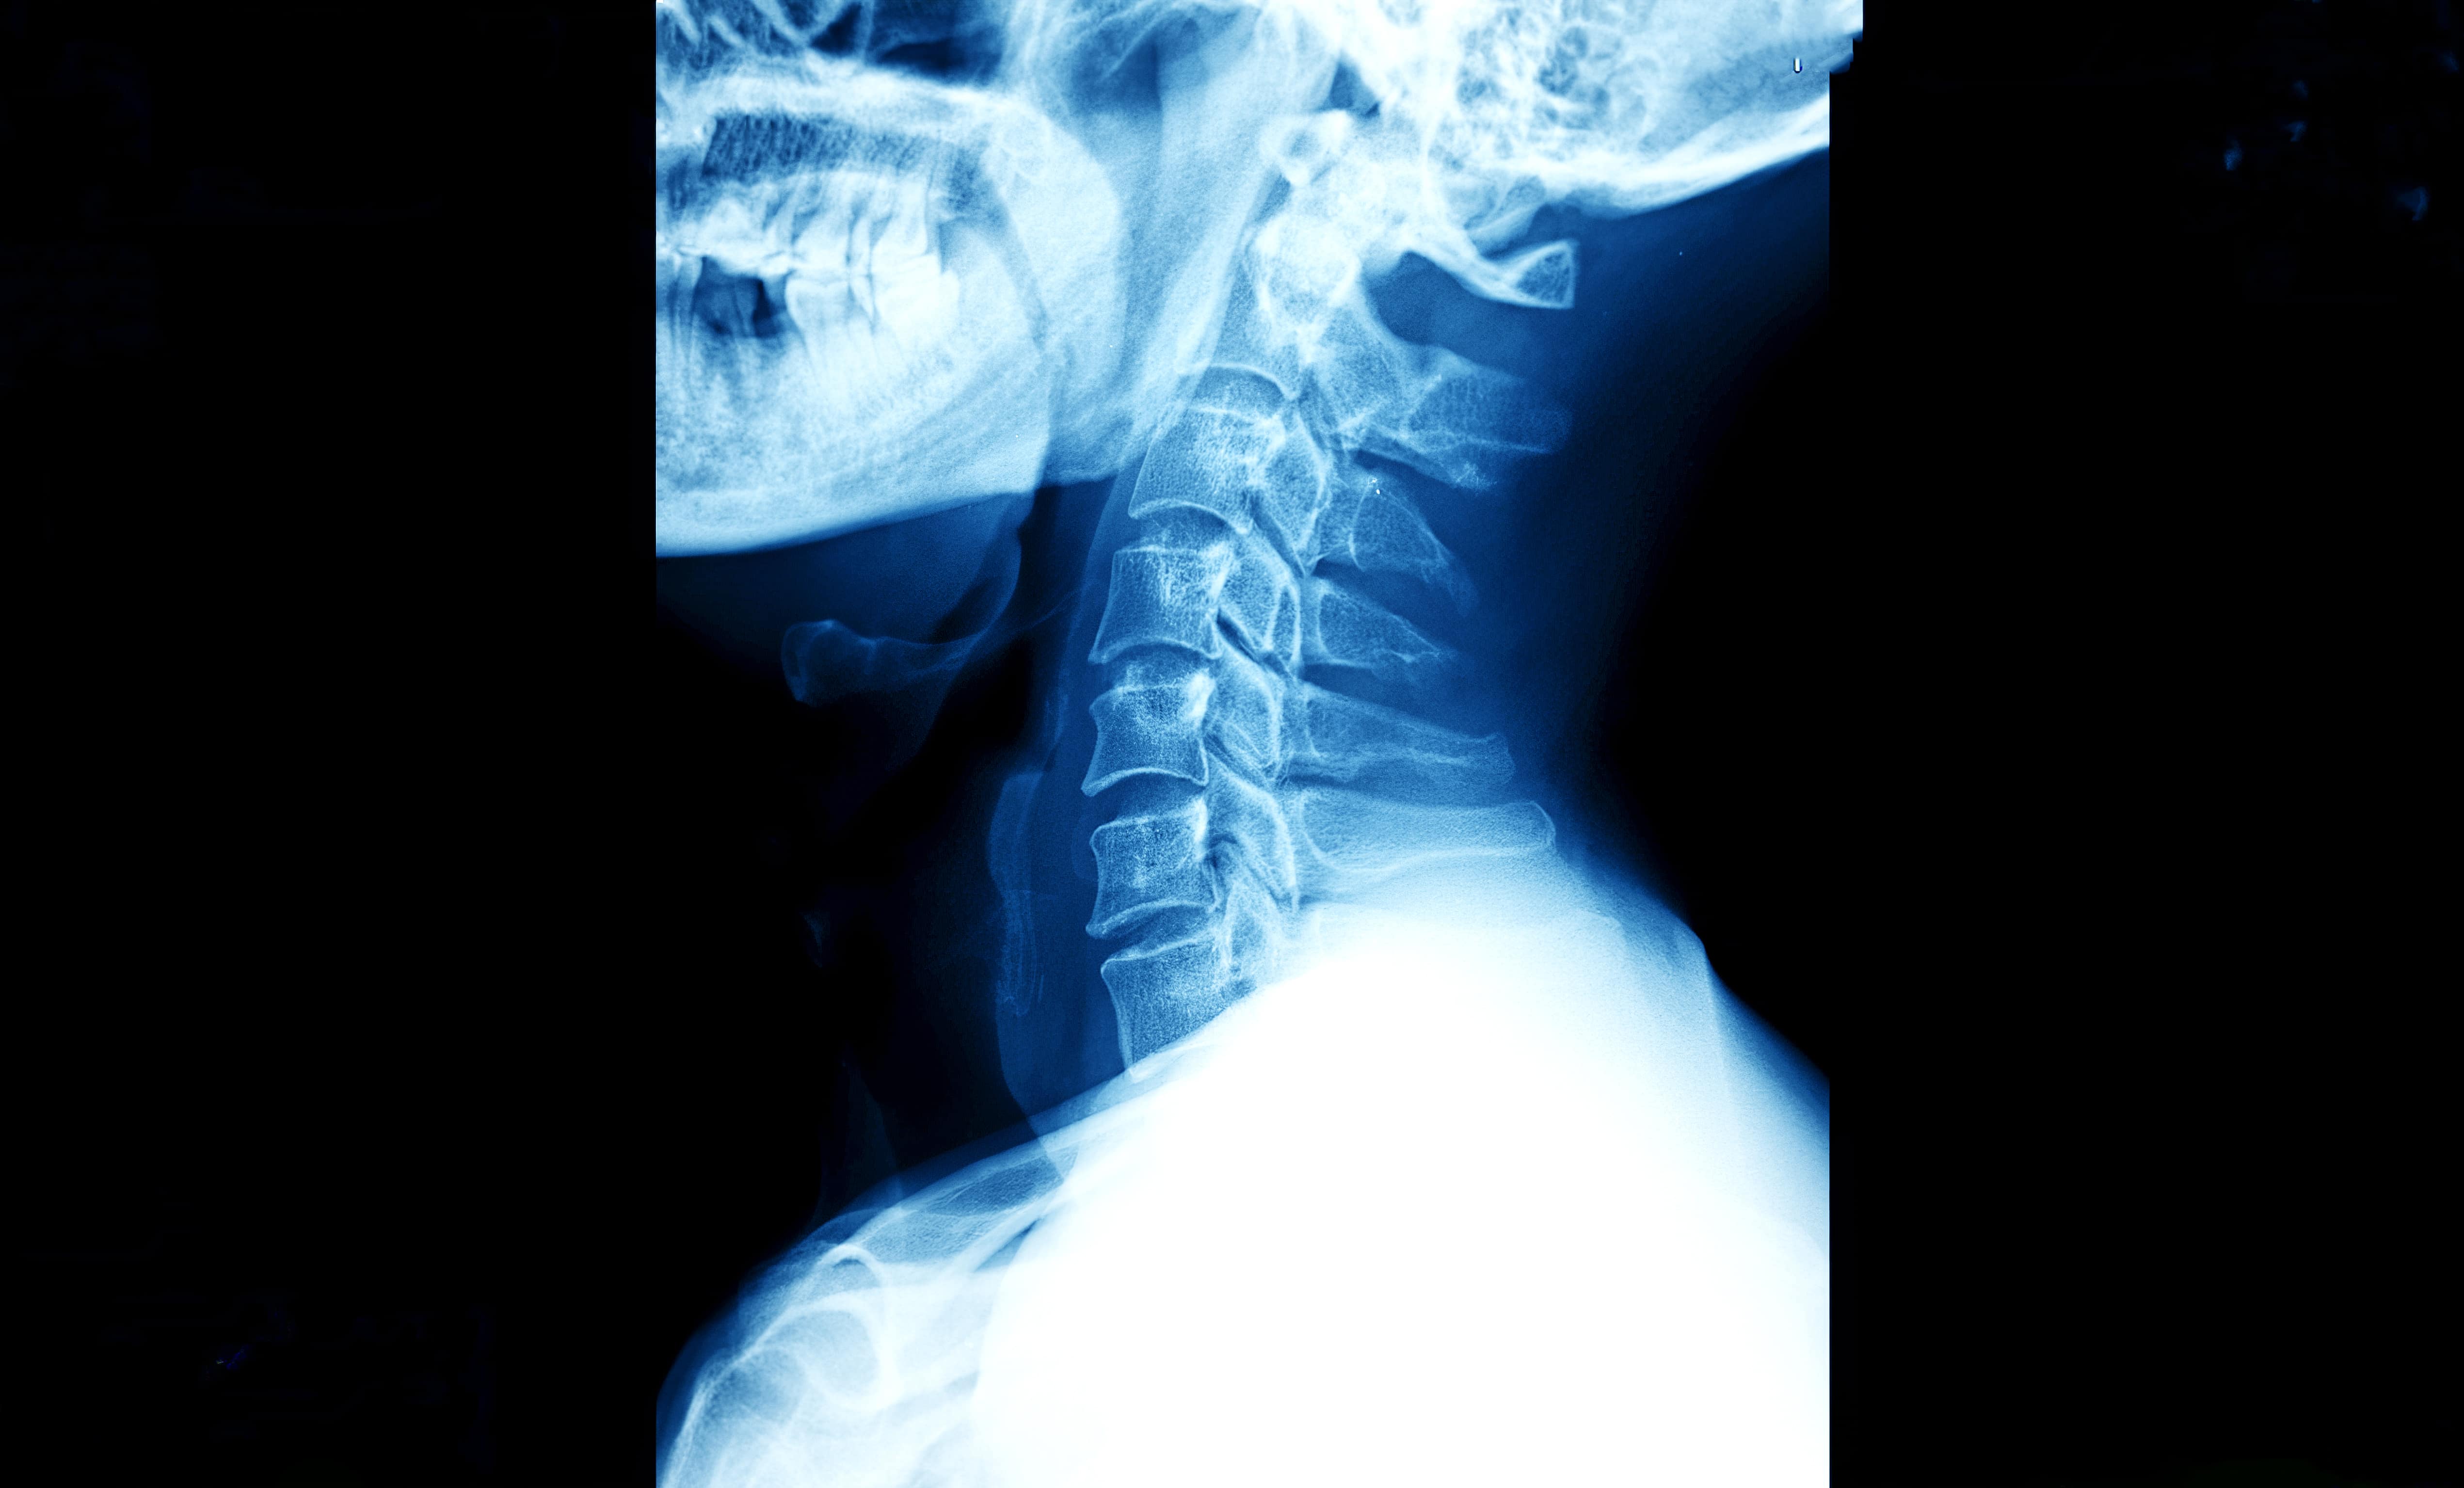 Plain x-ray of neck, to help diagnose neck disc bulge. Chiropractor and osteopaths use X-rays to help diagnose disorders.